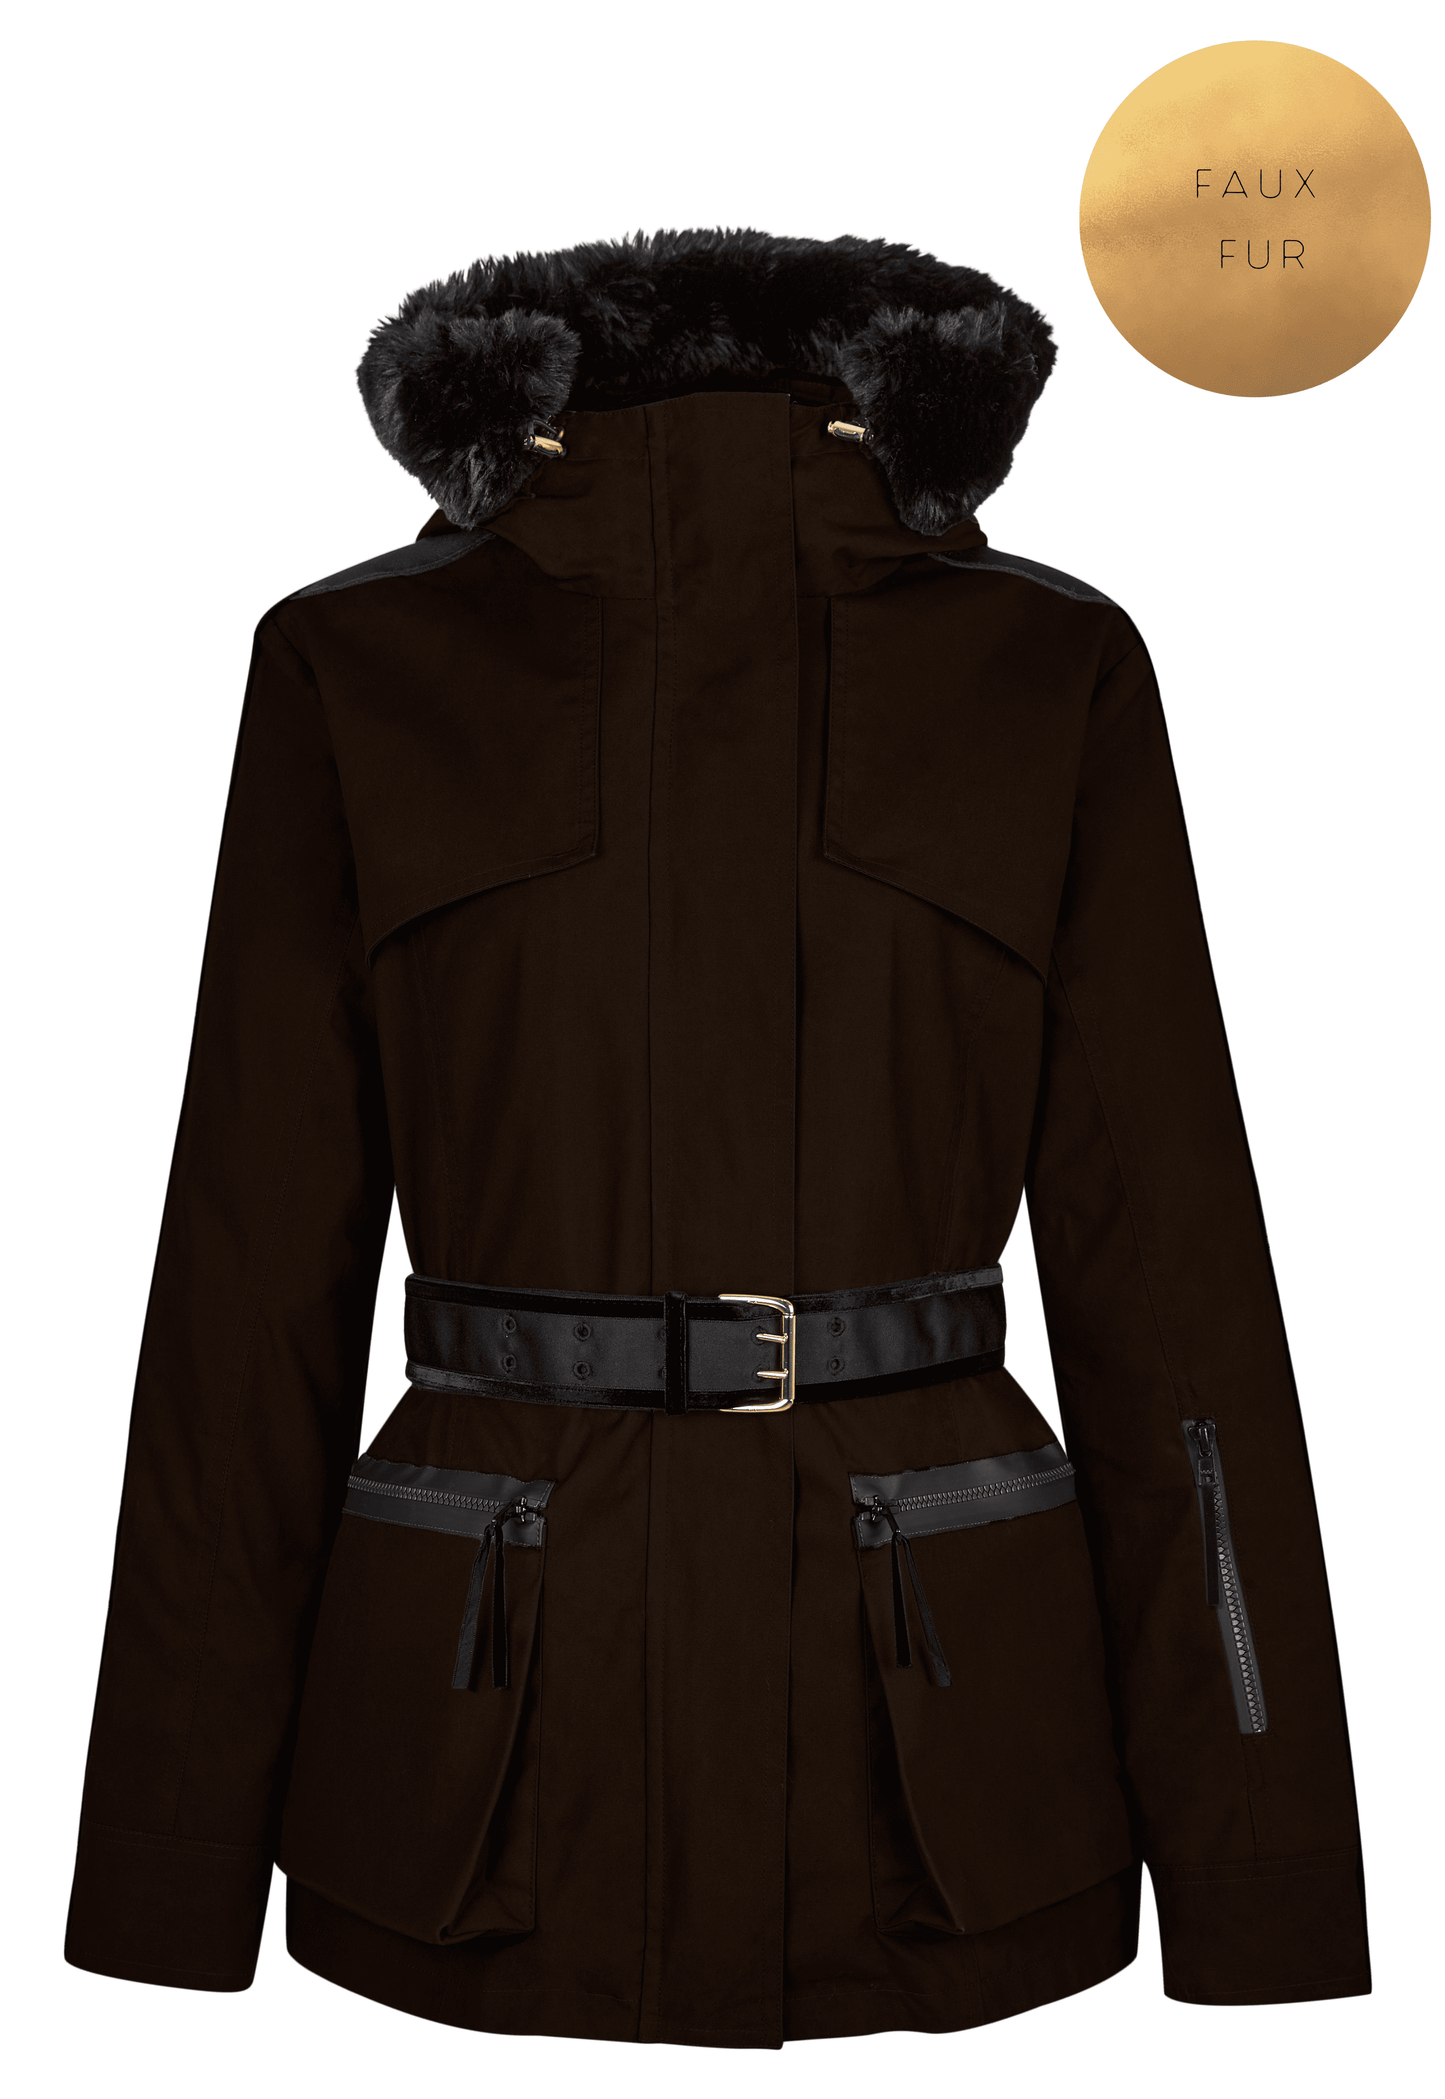 Elements Parka in Chocolate - Faux Fur